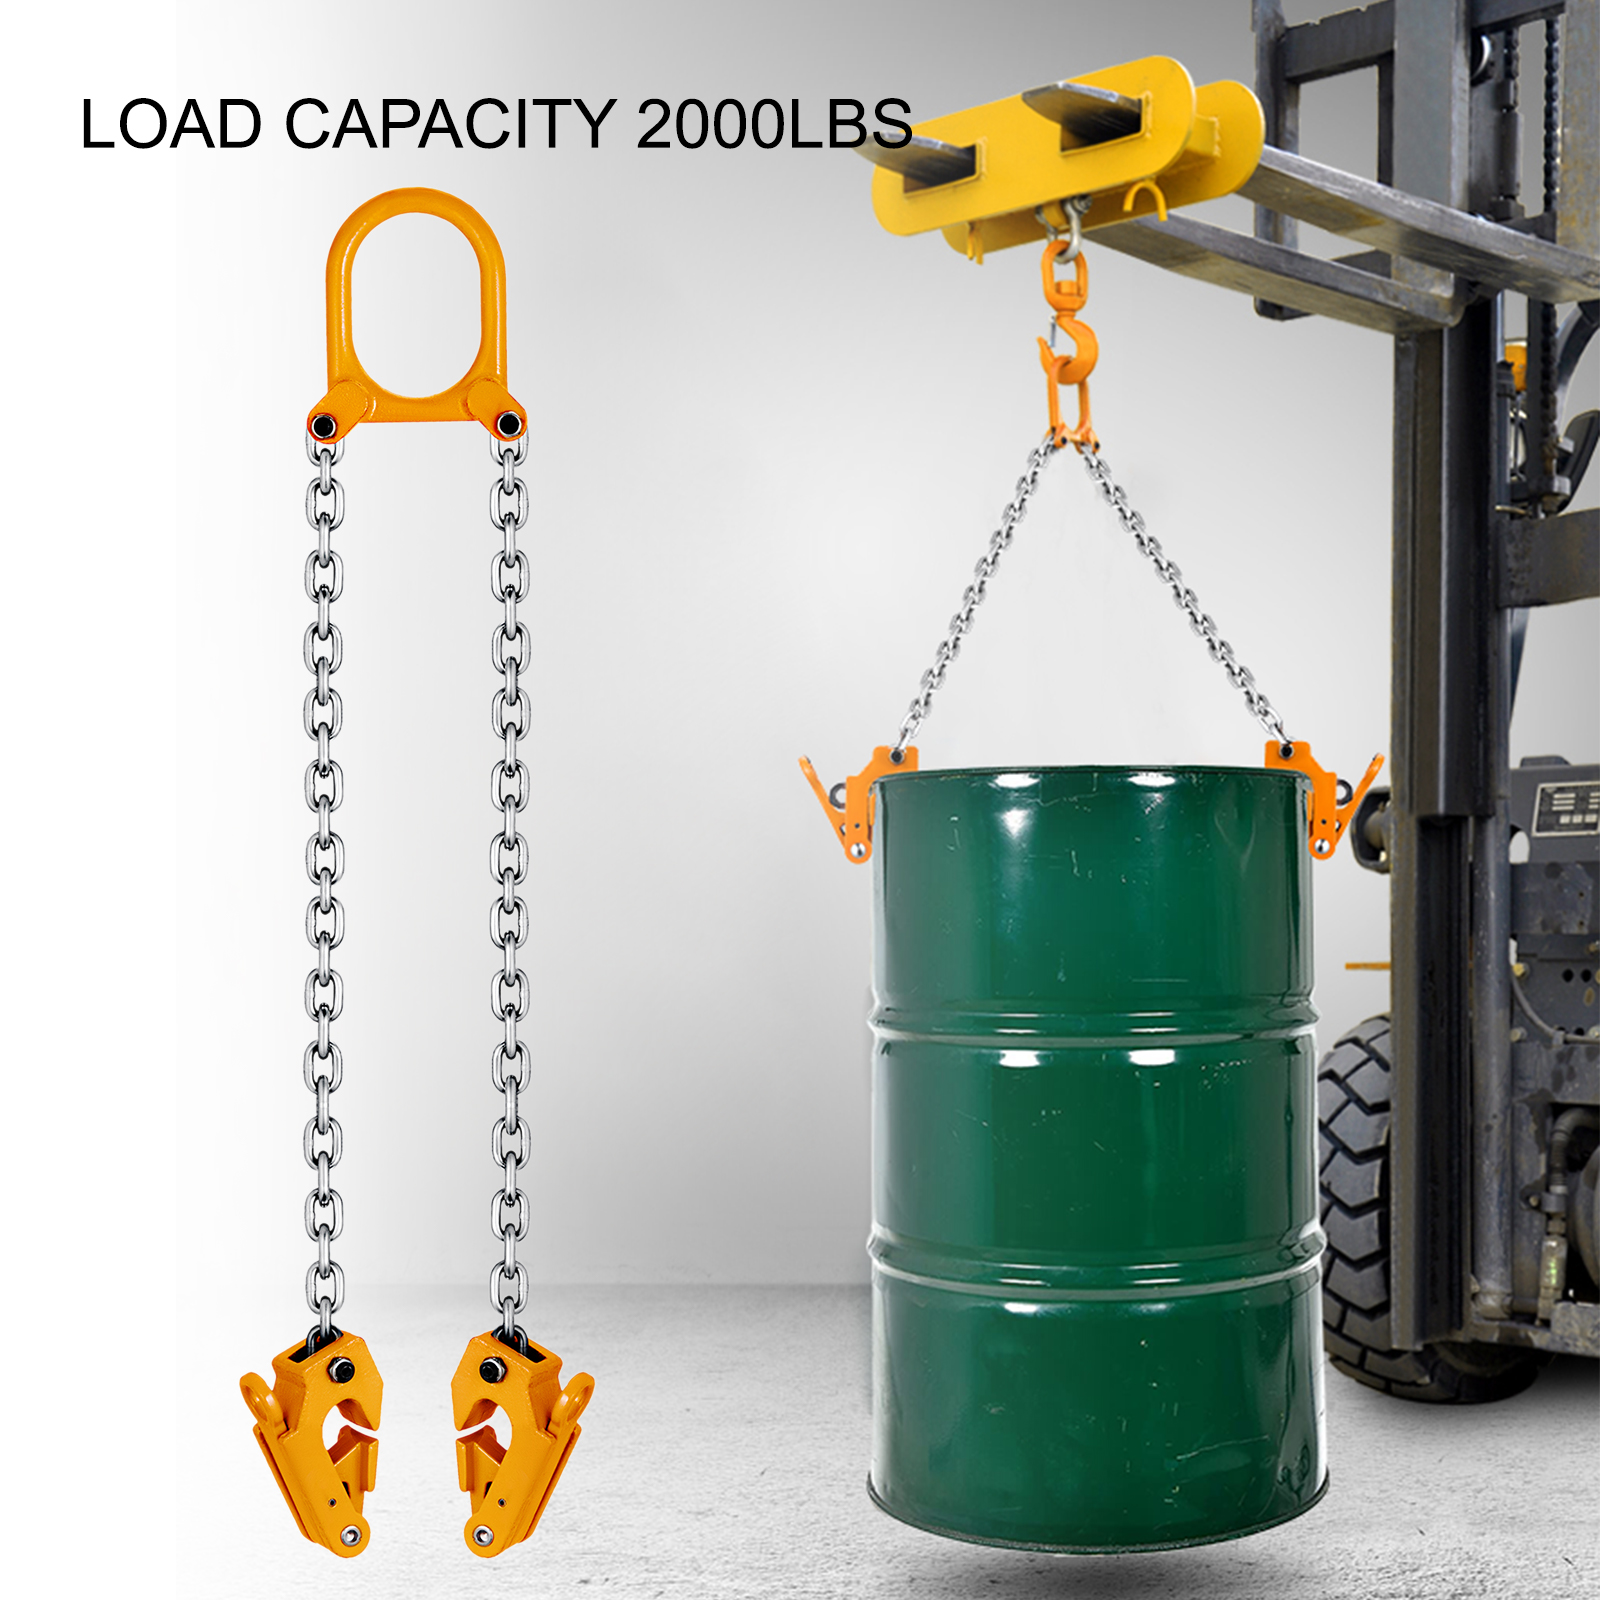 2000 lbs Capacity Chain Drum Lifter G80 Lifting Chain Drum Lifter Clamp Oil Drum Lifting Barrel Lifter Vertical Chain Drum Lifter Yellow 